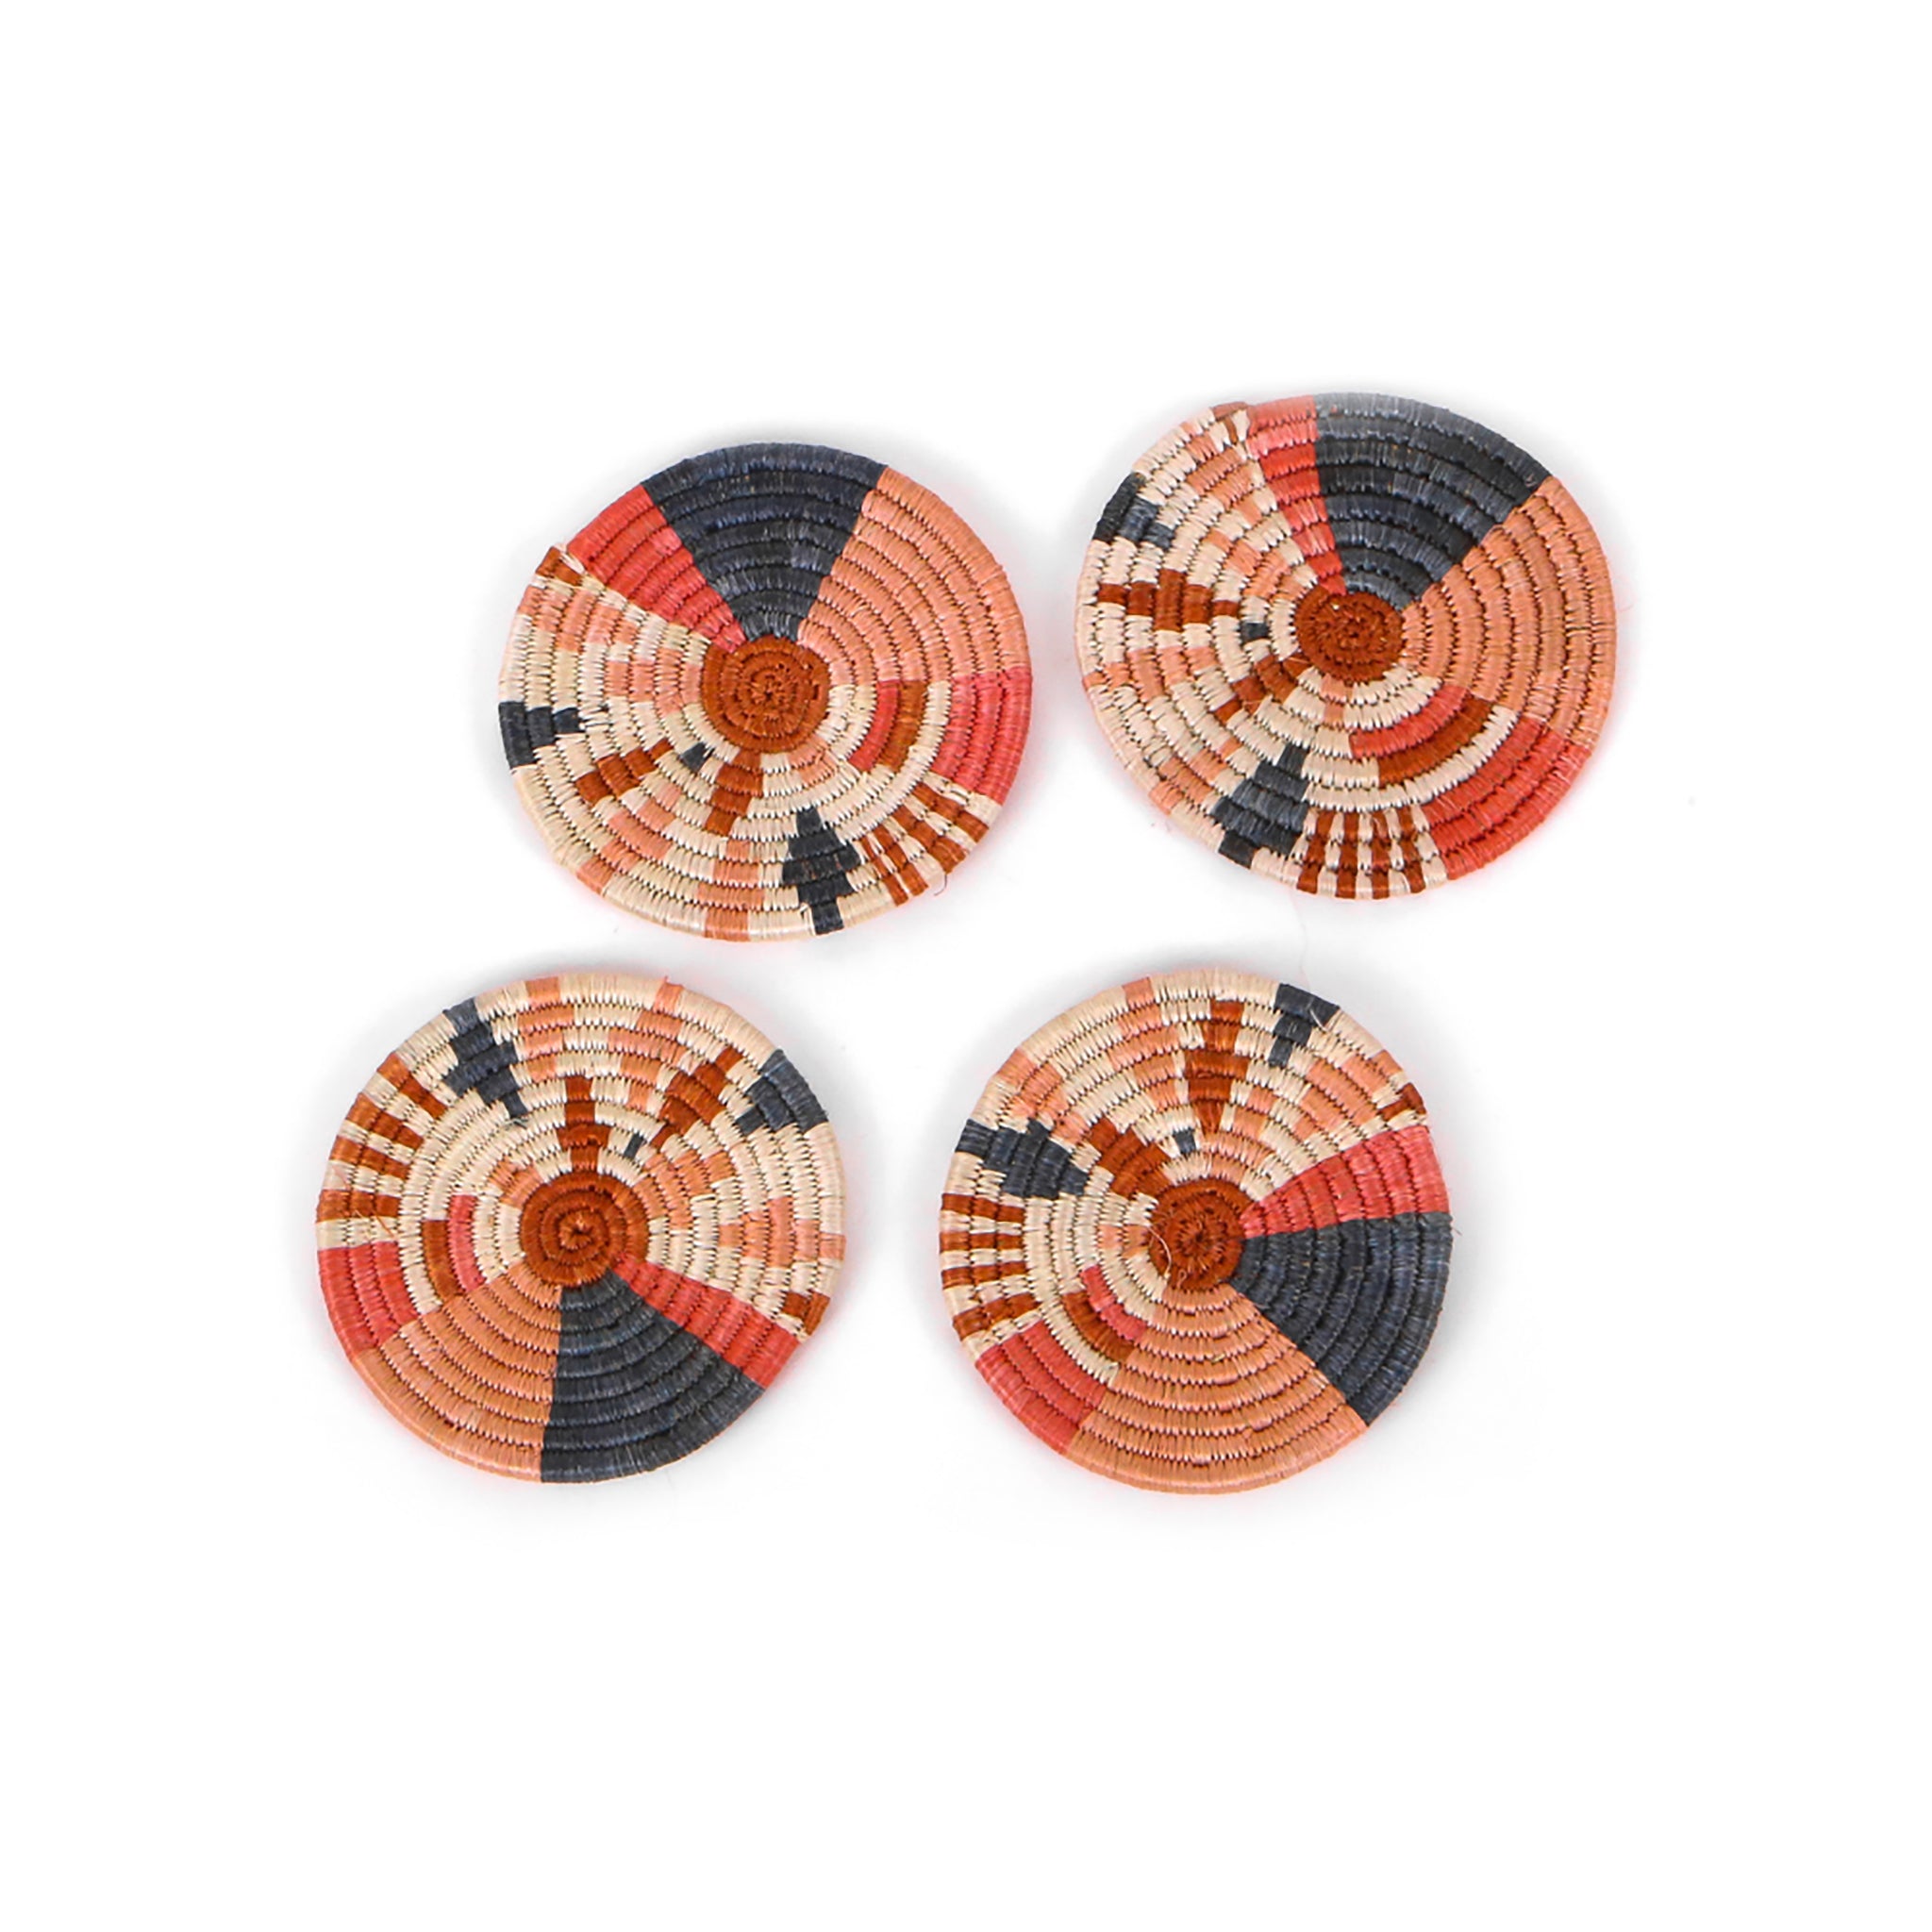 Caldera Woven Coasters in Coral and Gray, Set of 4